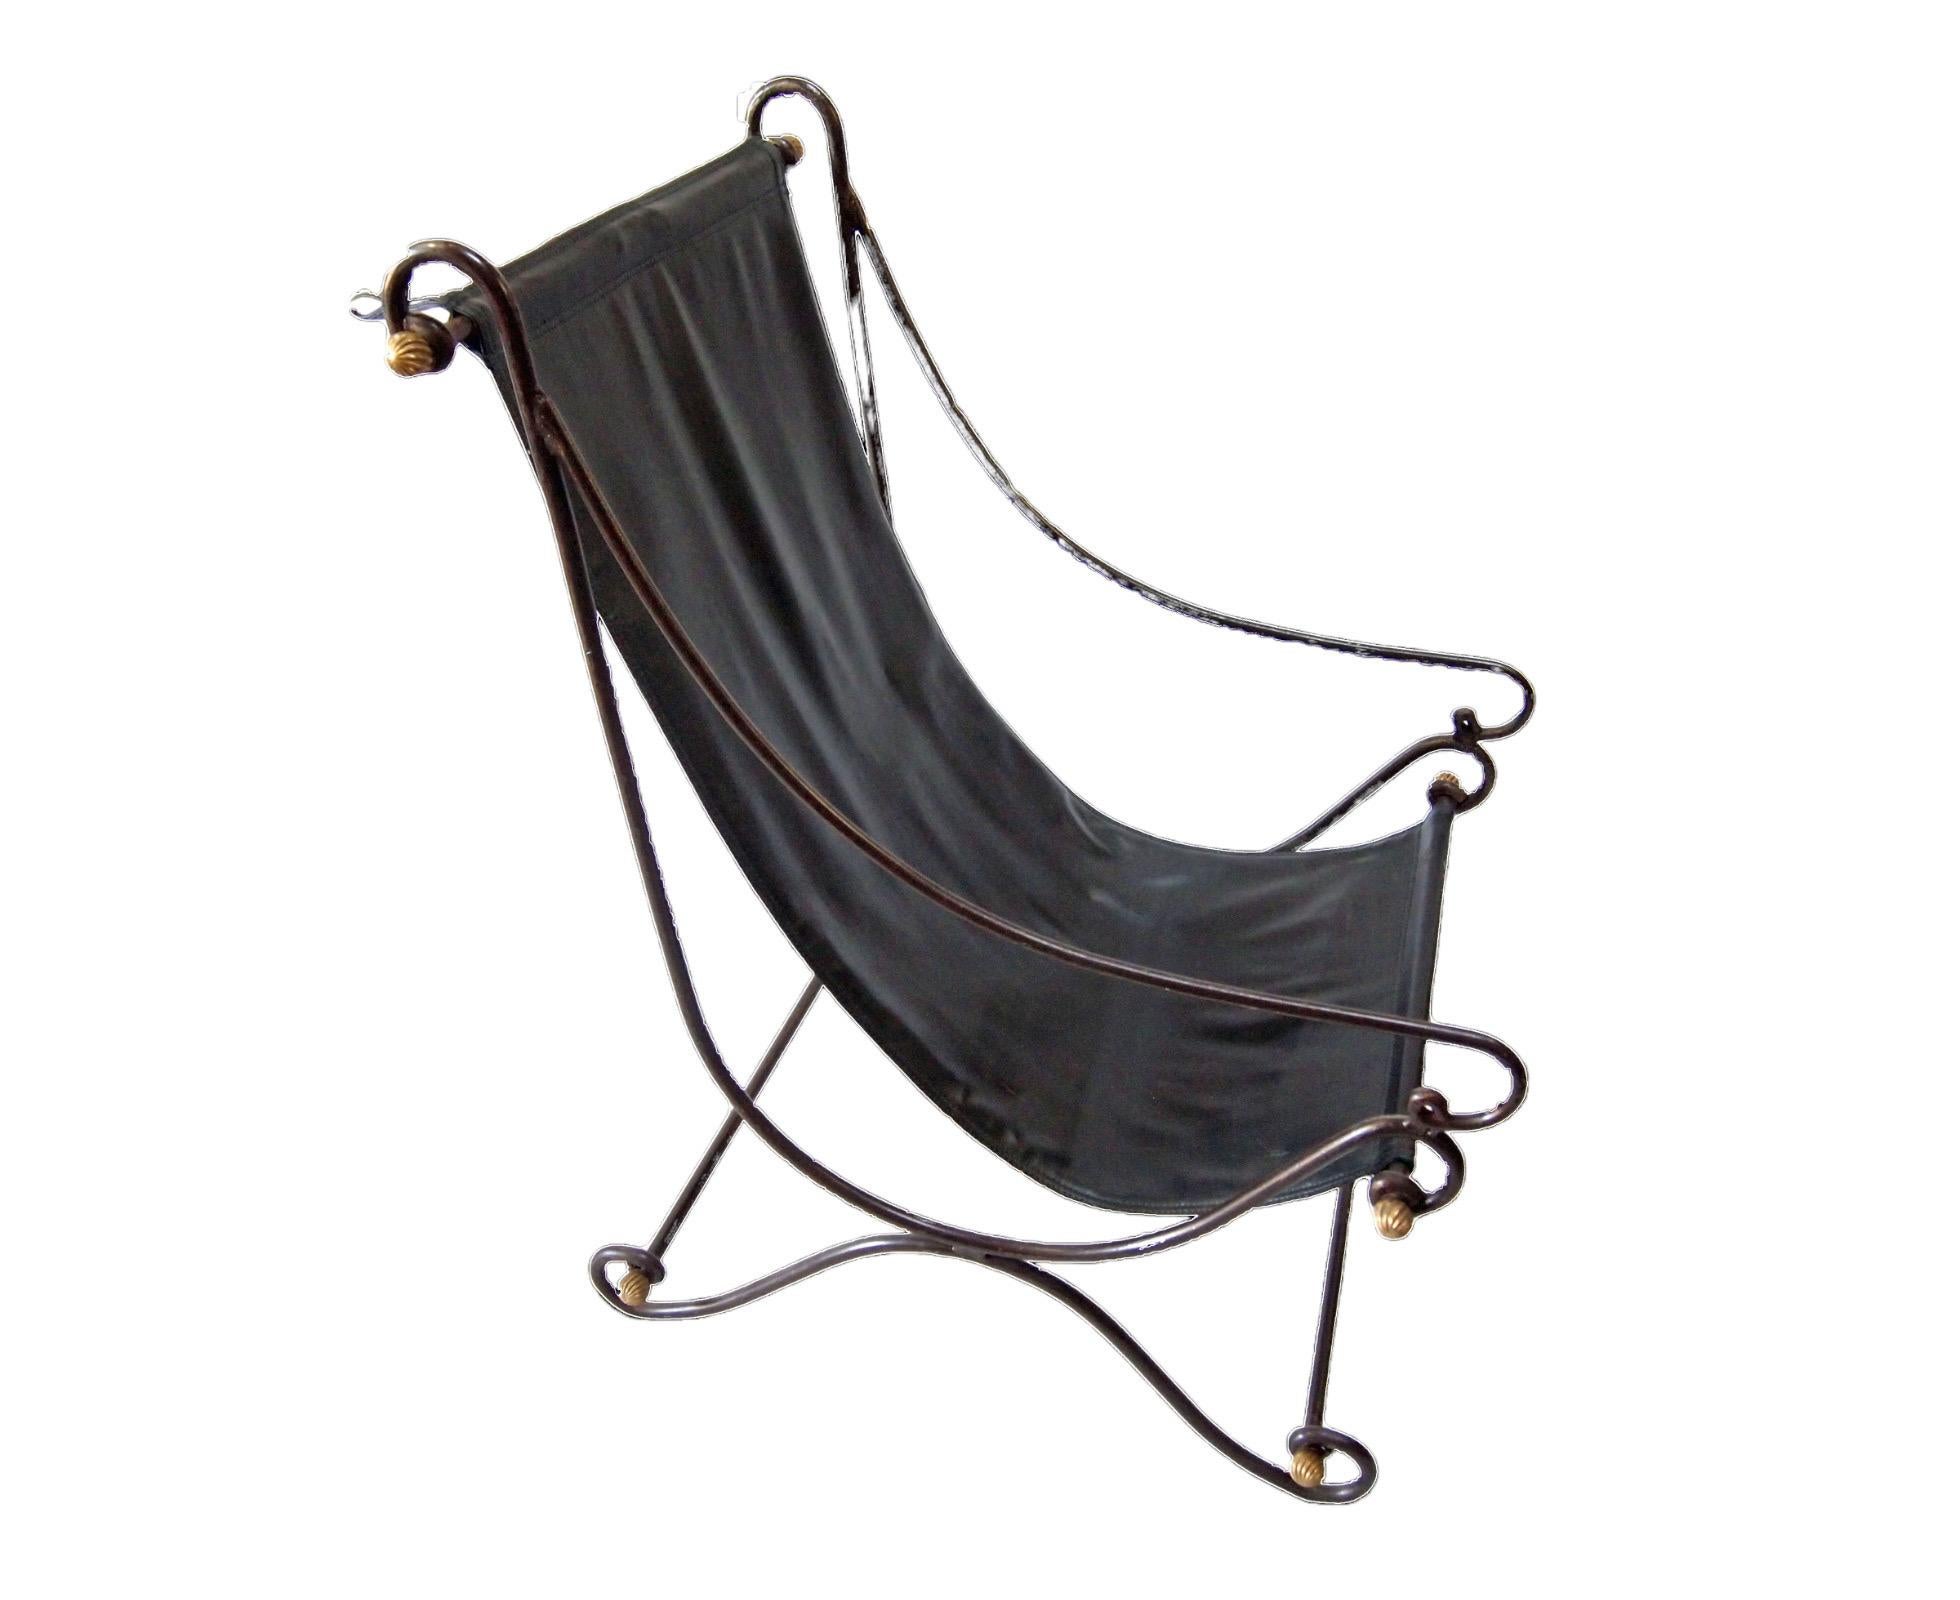 Pair of Mid Century Sling Lounge Chairs, circa 1970s.
Iron frame with connecting rods finished with gilt ribbed bronze ball finials. Each chair has simulated black leather seats. The seats can be adjusted by removing the finials and changing the